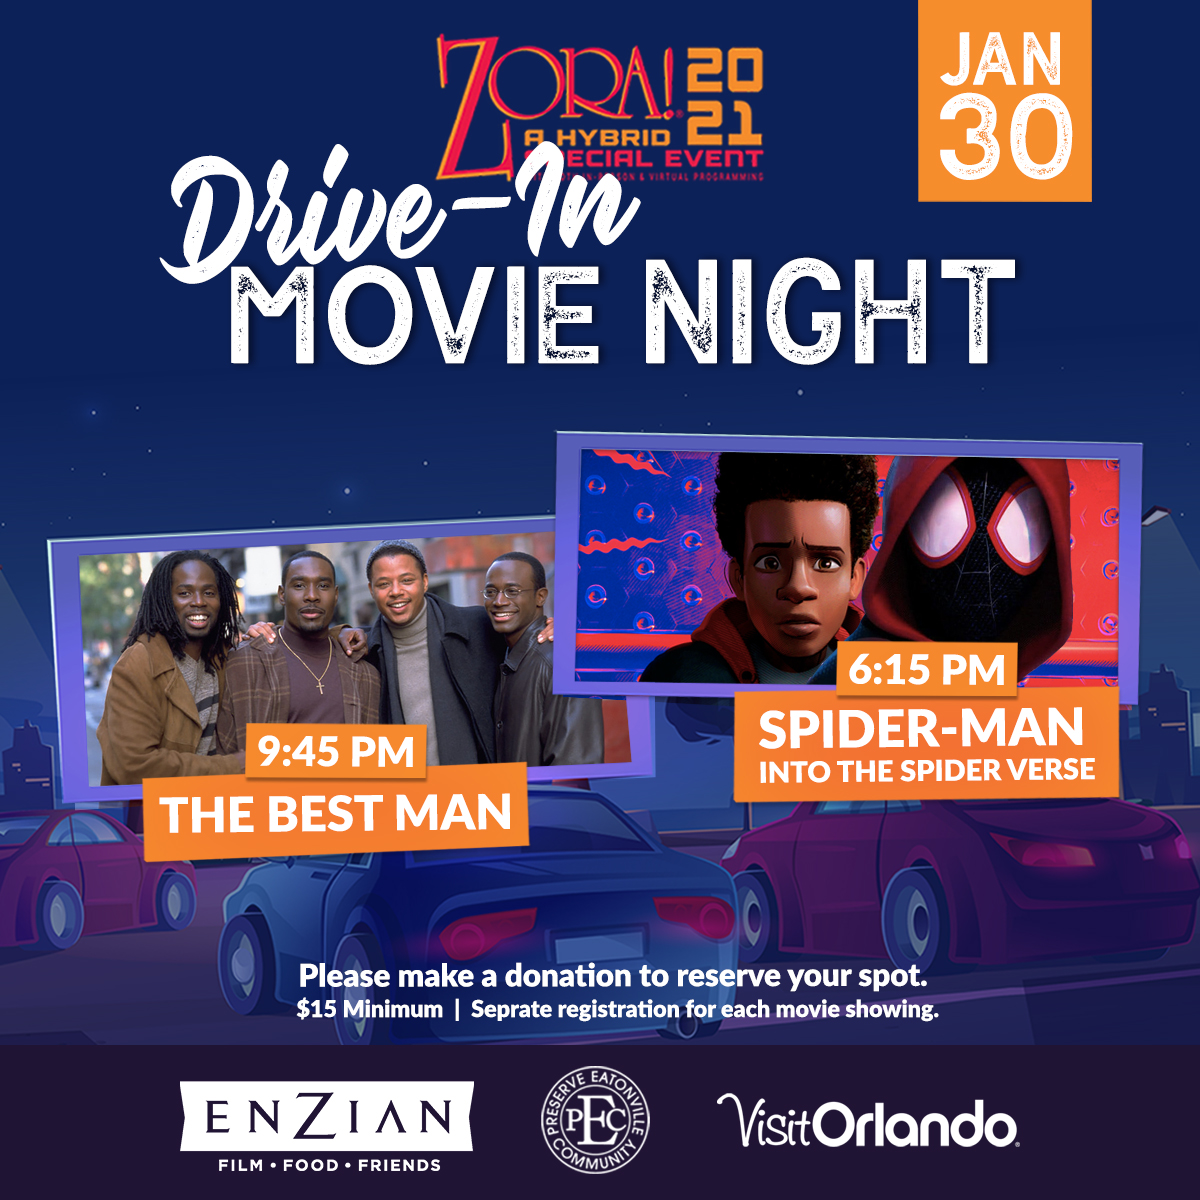 Drive-In Movie Night. Courtesy of the Association to Preserve Eatonville Community, Inc. All rights reserved.